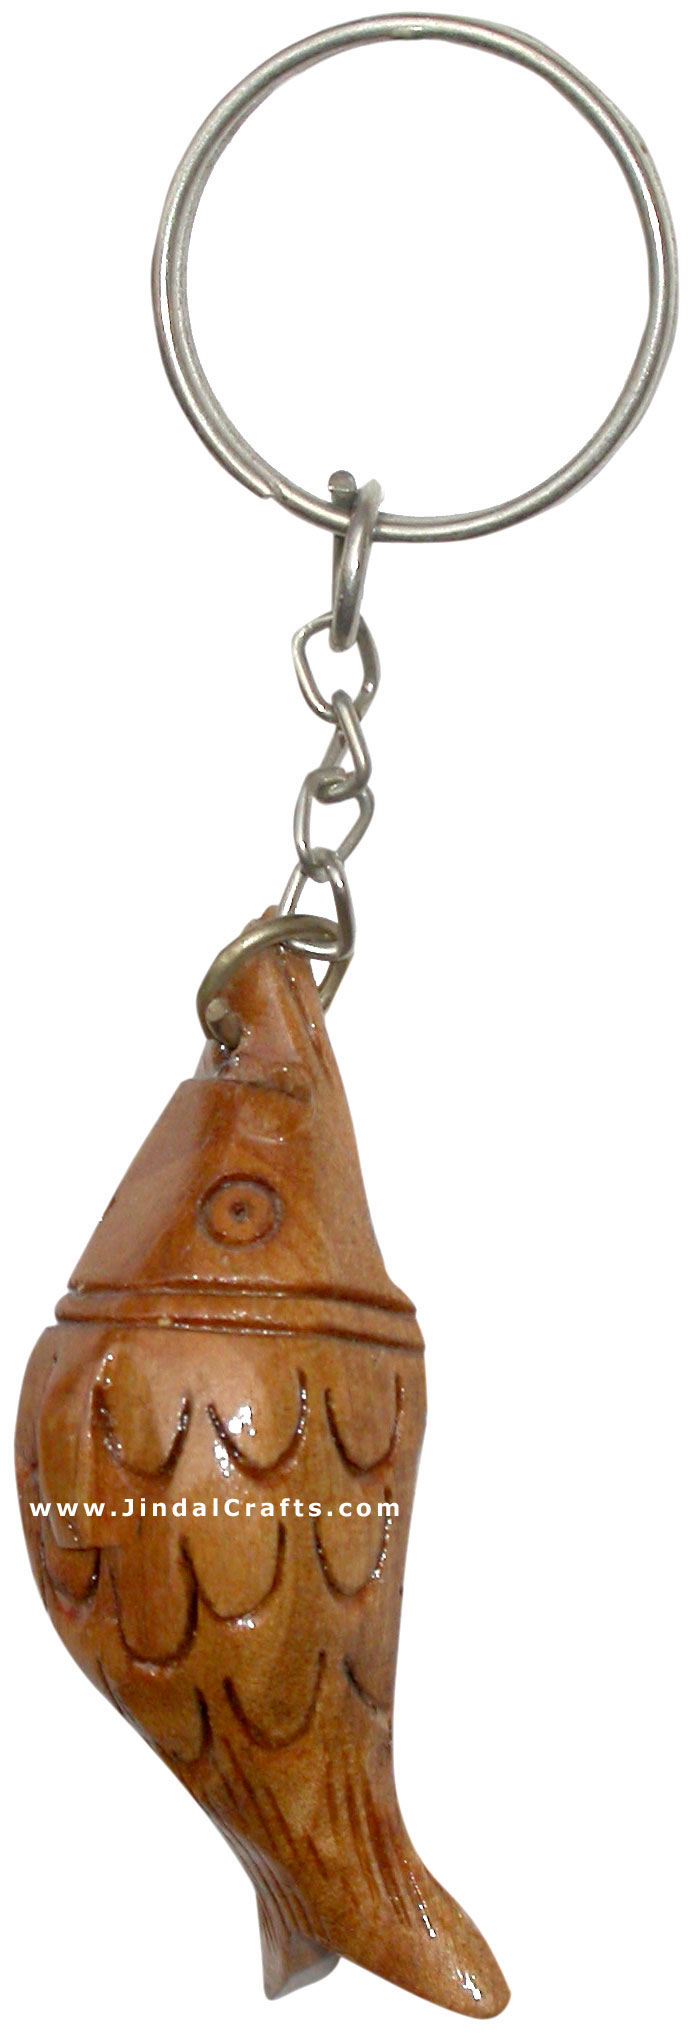 Handcarved Wooden Fish Key Chain Key Ring Gift Art